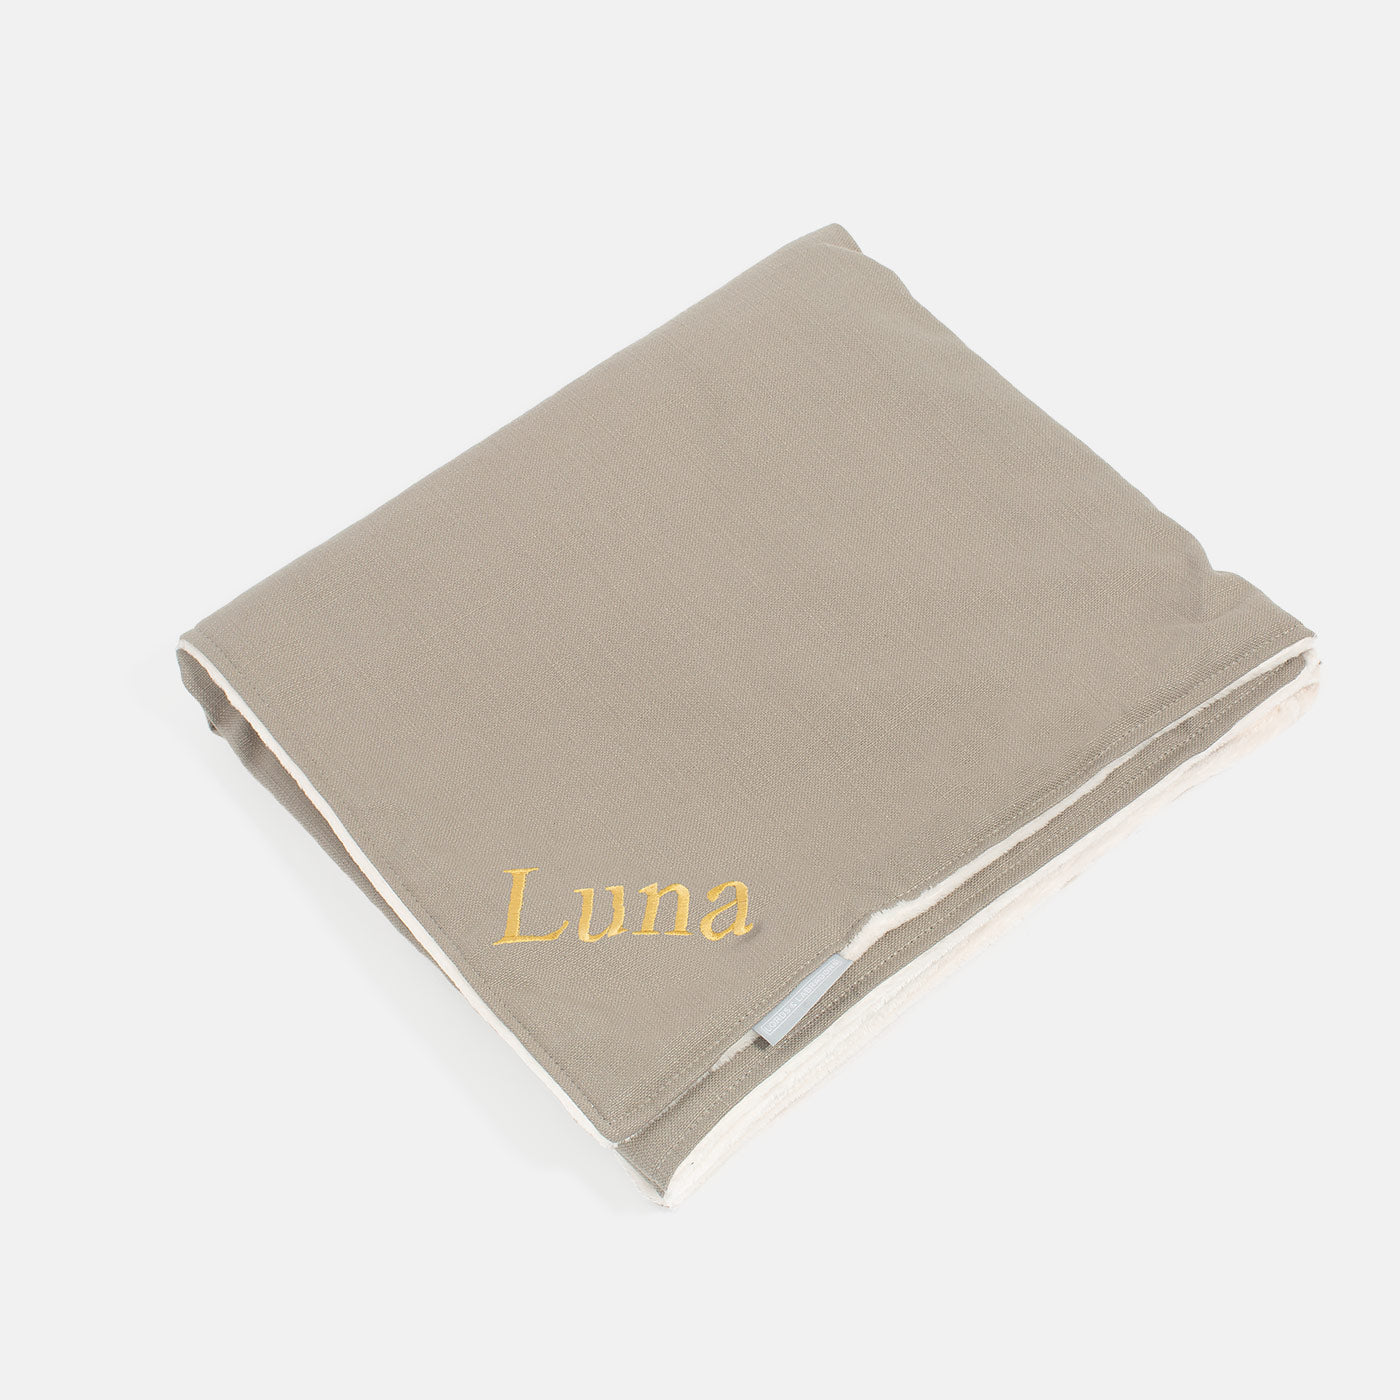  Discover Our Luxurious Savanna Stone Dog Blanket With Super Soft Sherpa & Teddy Fleece, The Perfect Blanket For Puppies, Available To Personalise And In 2 Sizes Here at Lords & Labradors